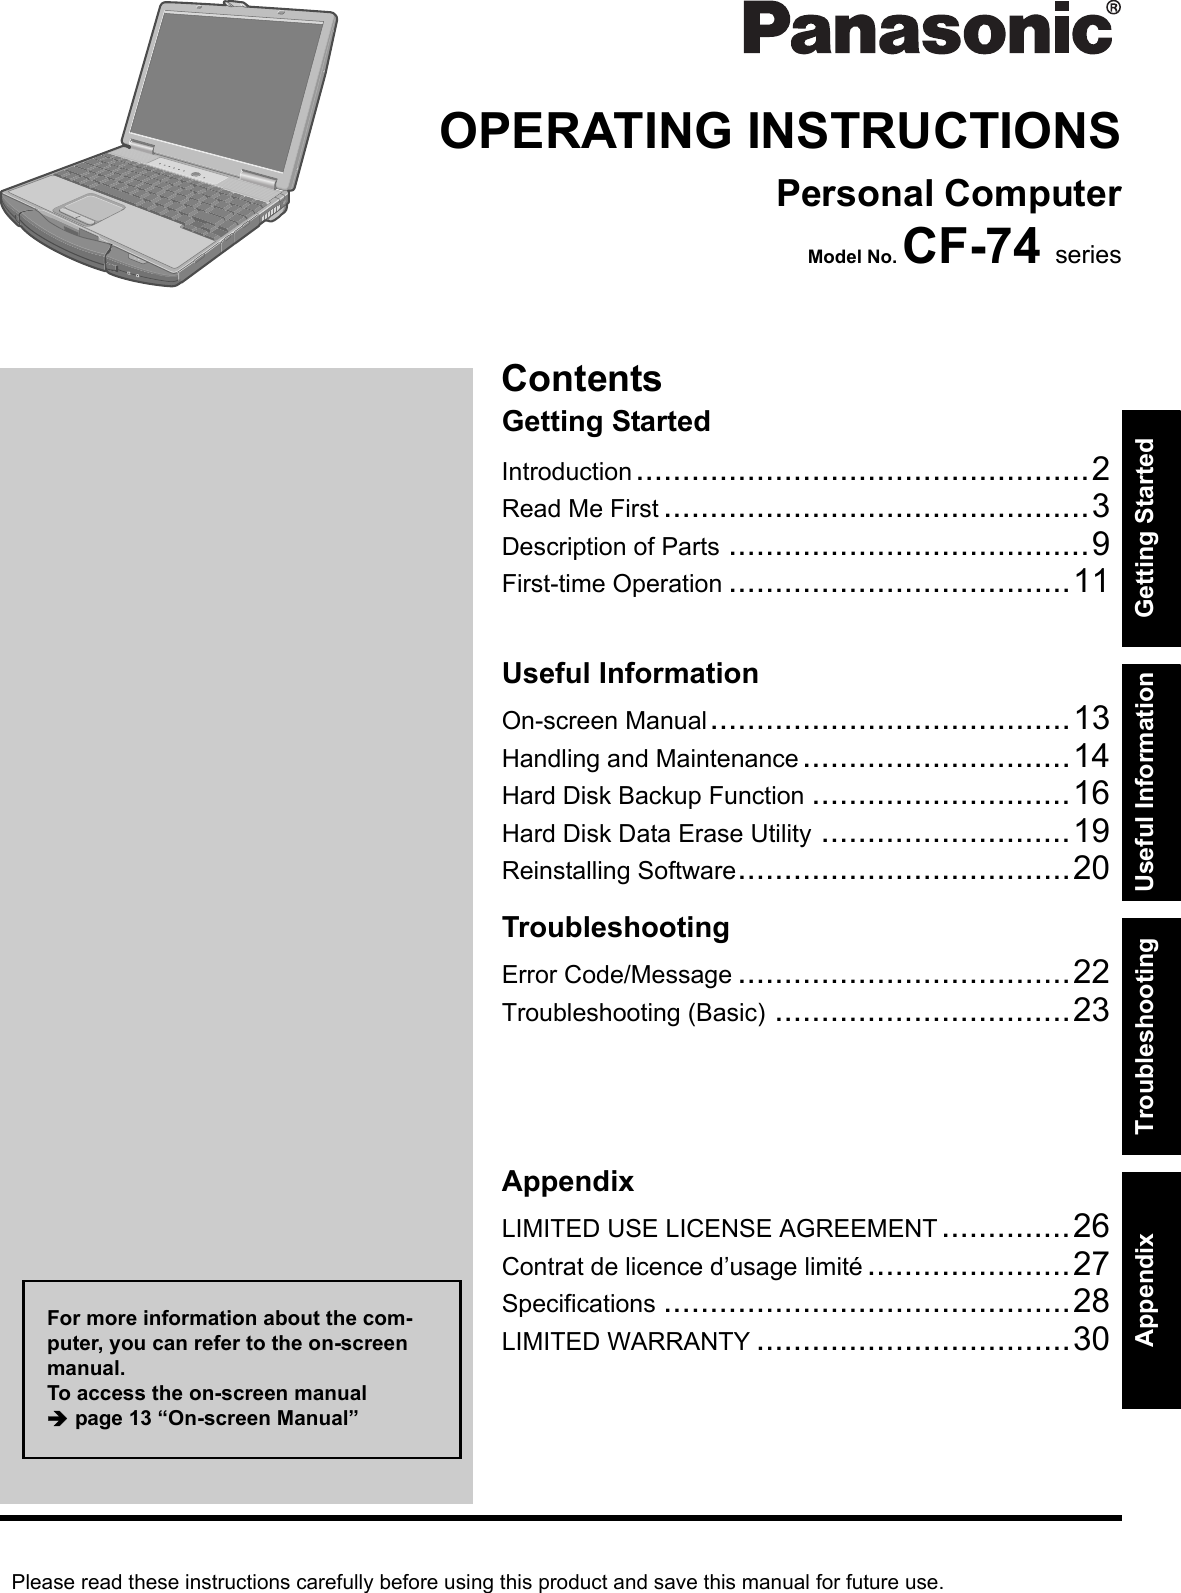 Please read these instructions carefully before using this product and save this manual for future use.ContentsGetting StartedUseful InformationTroubleshootingGetting StartedUseful InformationTroubleshootingAppendixAppendixOPERATING INSTRUCTIONSPersonal ComputerModel No. CF-74 seriesIntroduction.................................................2Read Me First ..............................................3Description of Parts .......................................9First-time Operation .....................................11On-screen Manual.......................................13Handling and Maintenance.............................14Hard Disk Backup Function ............................16Hard Disk Data Erase Utility ...........................19Reinstalling Software....................................20Error Code/Message ....................................22Troubleshooting (Basic) ................................23LIMITED USE LICENSE AGREEMENT..............26Contrat de licence d’usage limité ......................27Specifications ............................................28LIMITED WARRANTY ..................................30For more information about the com-puter, you can refer to the on-screen manual.To access the on-screen manual Îpage 13 “On-screen Manual”